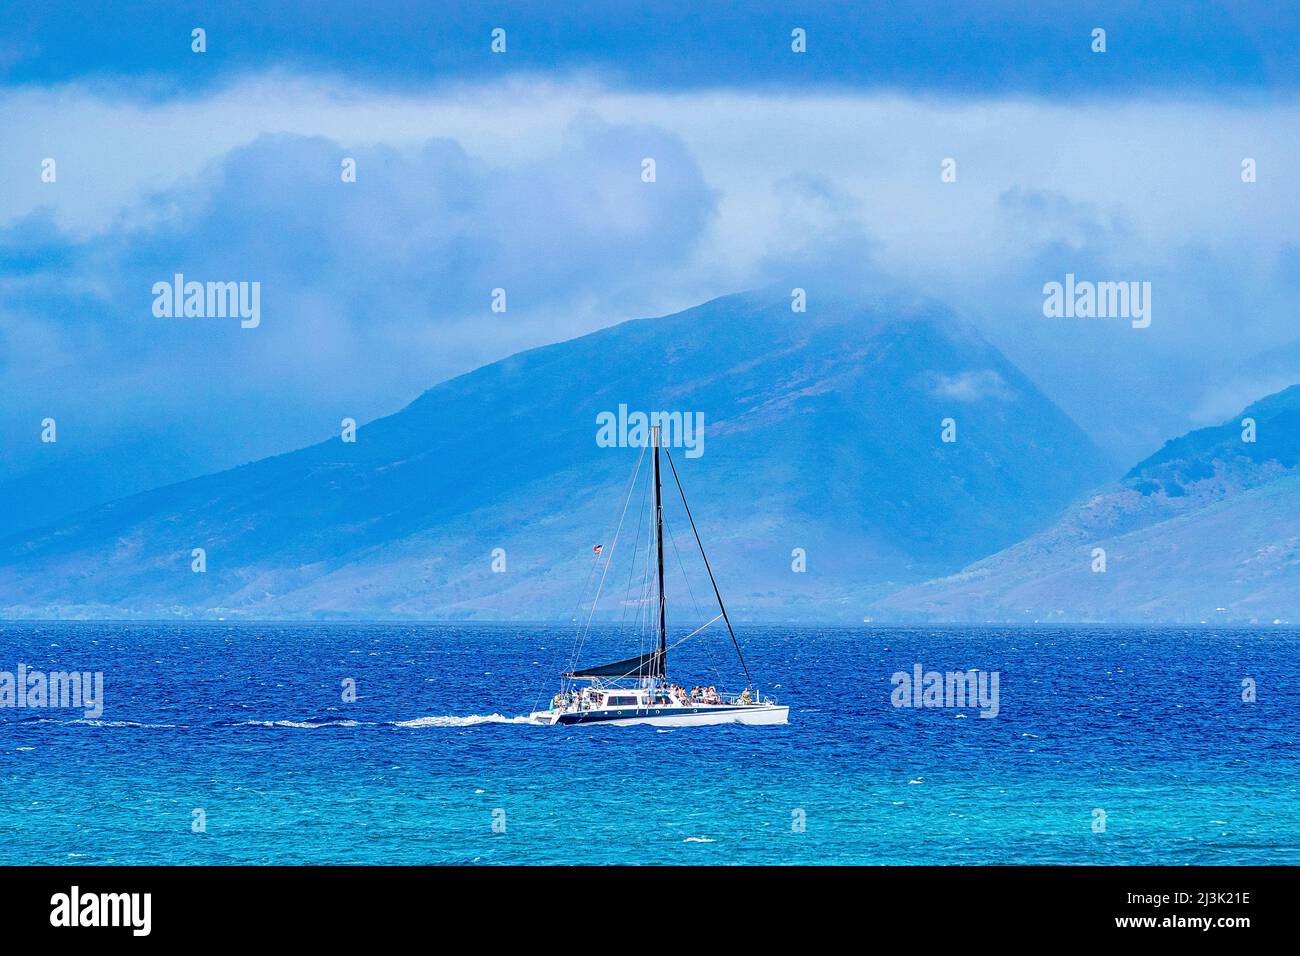 Sailboat moving through the vibrant blue water with the coastline of a hawaiian island in the distance Stock Photo